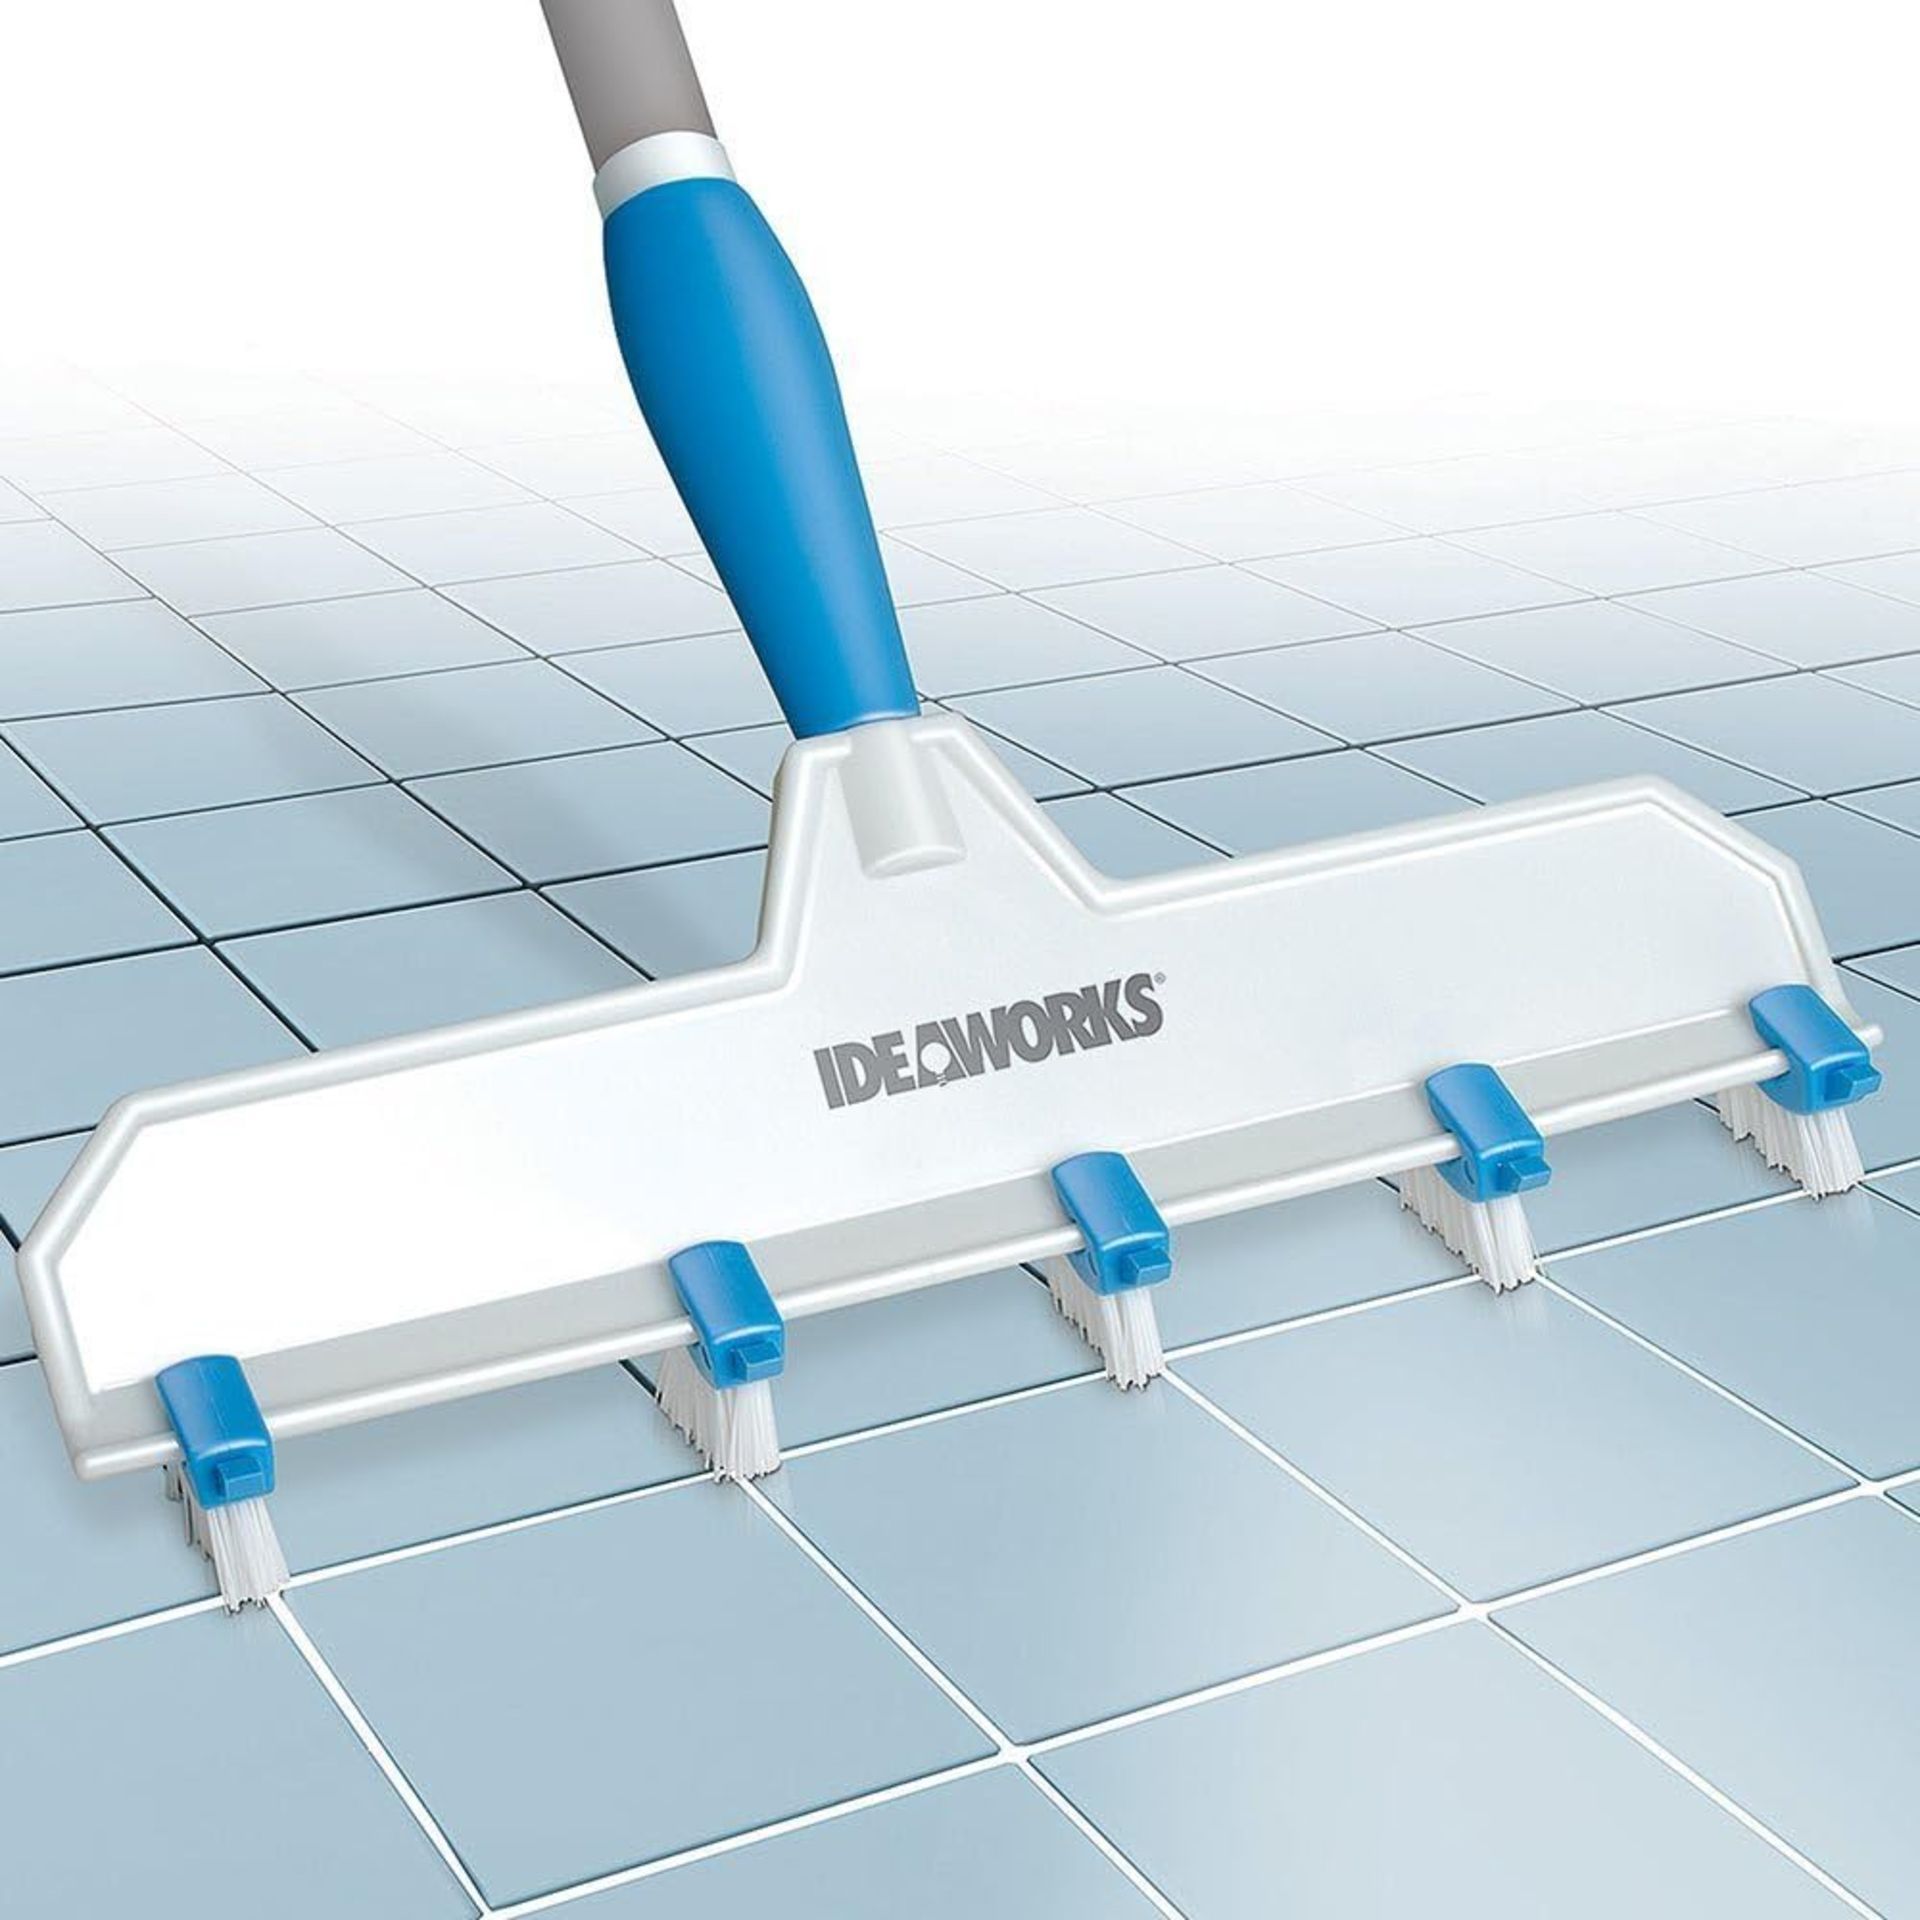 20 X BRAND NEW ADJUSTABLE HANDHELD GROUT CLEANING TOOLWITH SOFT GRIP HANDLE AND 8 MINI BRUSH HEADS - Image 2 of 2